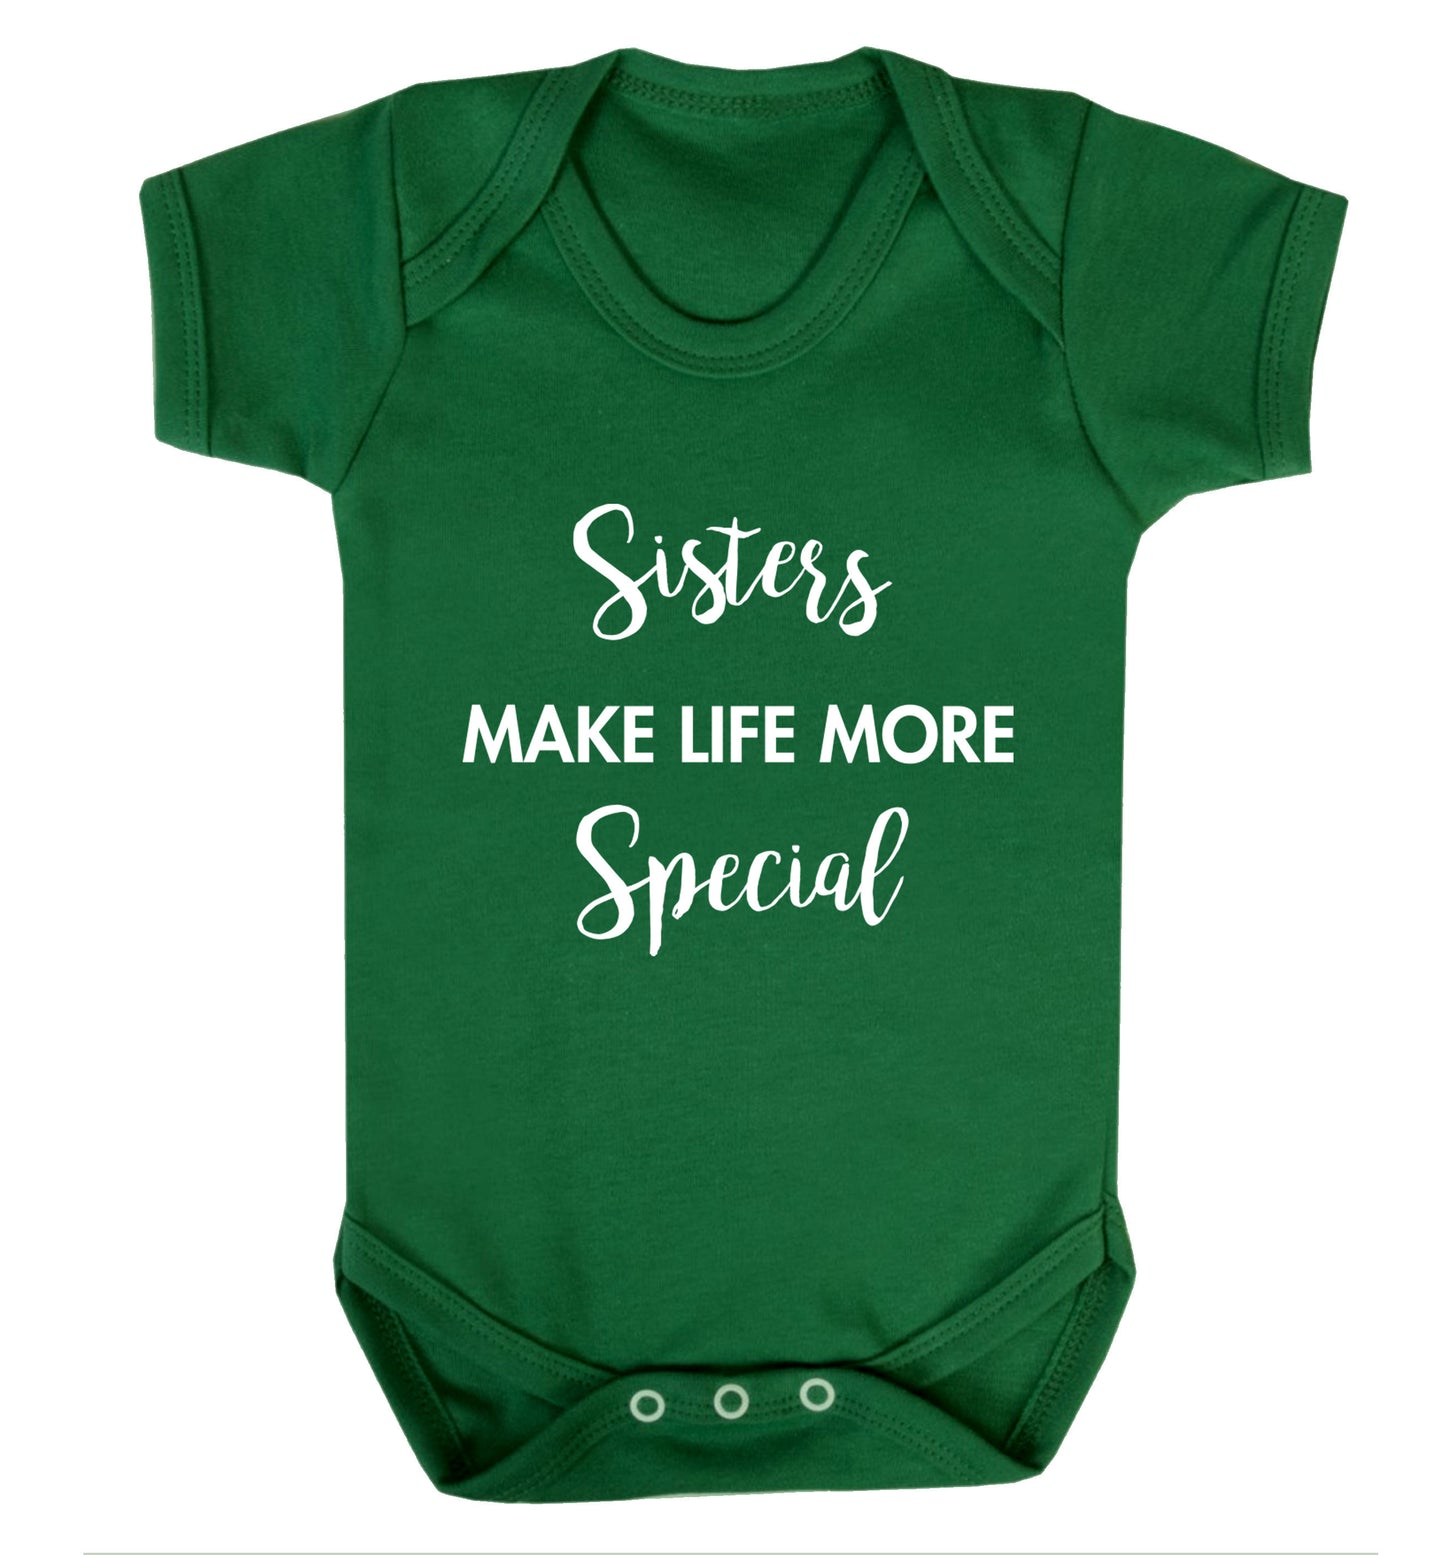 Sisters make life more special Baby Vest green 18-24 months